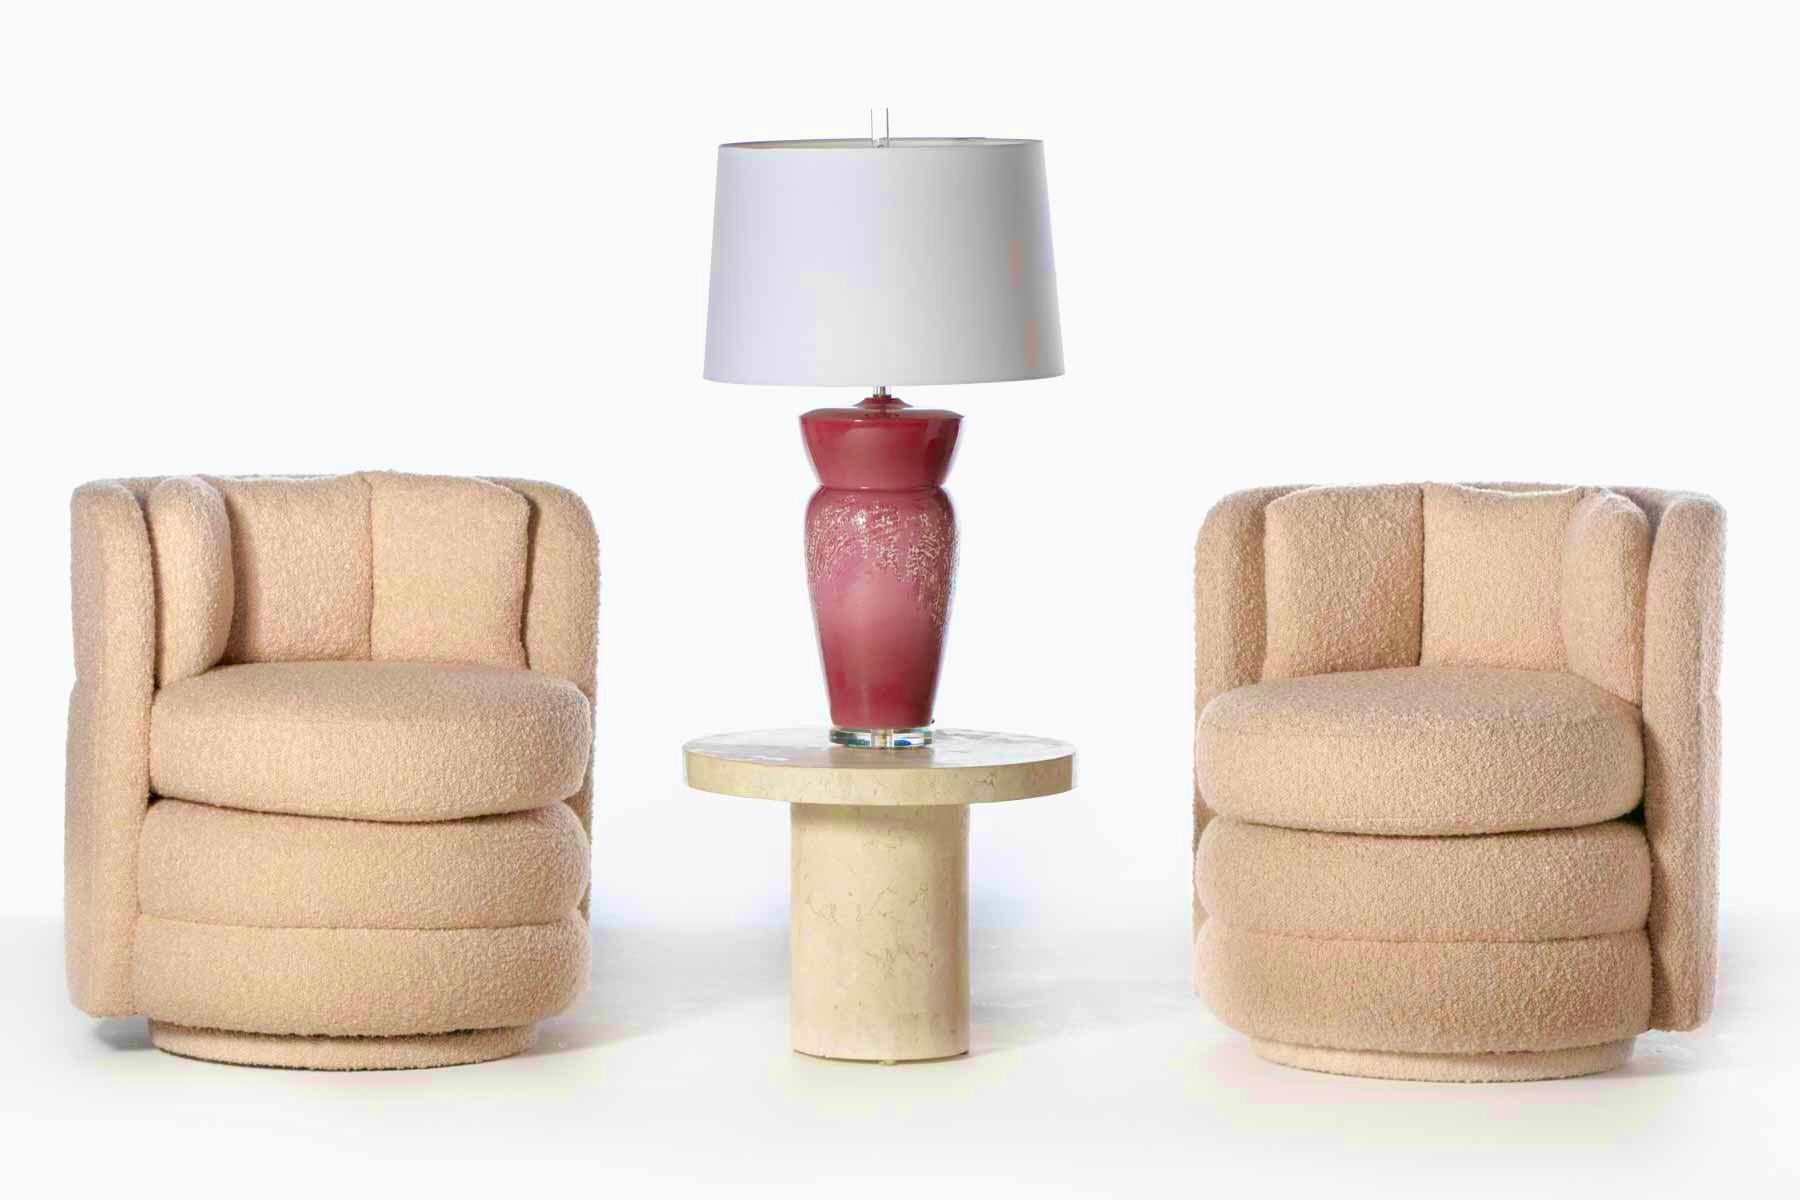 Raspberry beret all the way with this pair of large monumental pink sorbet Ceramic Lamps produced by Sunset in the 1980s. The ceramic detail work on the bodies of the lamps draws attention making no two lamps alike. The raspberry pink color is